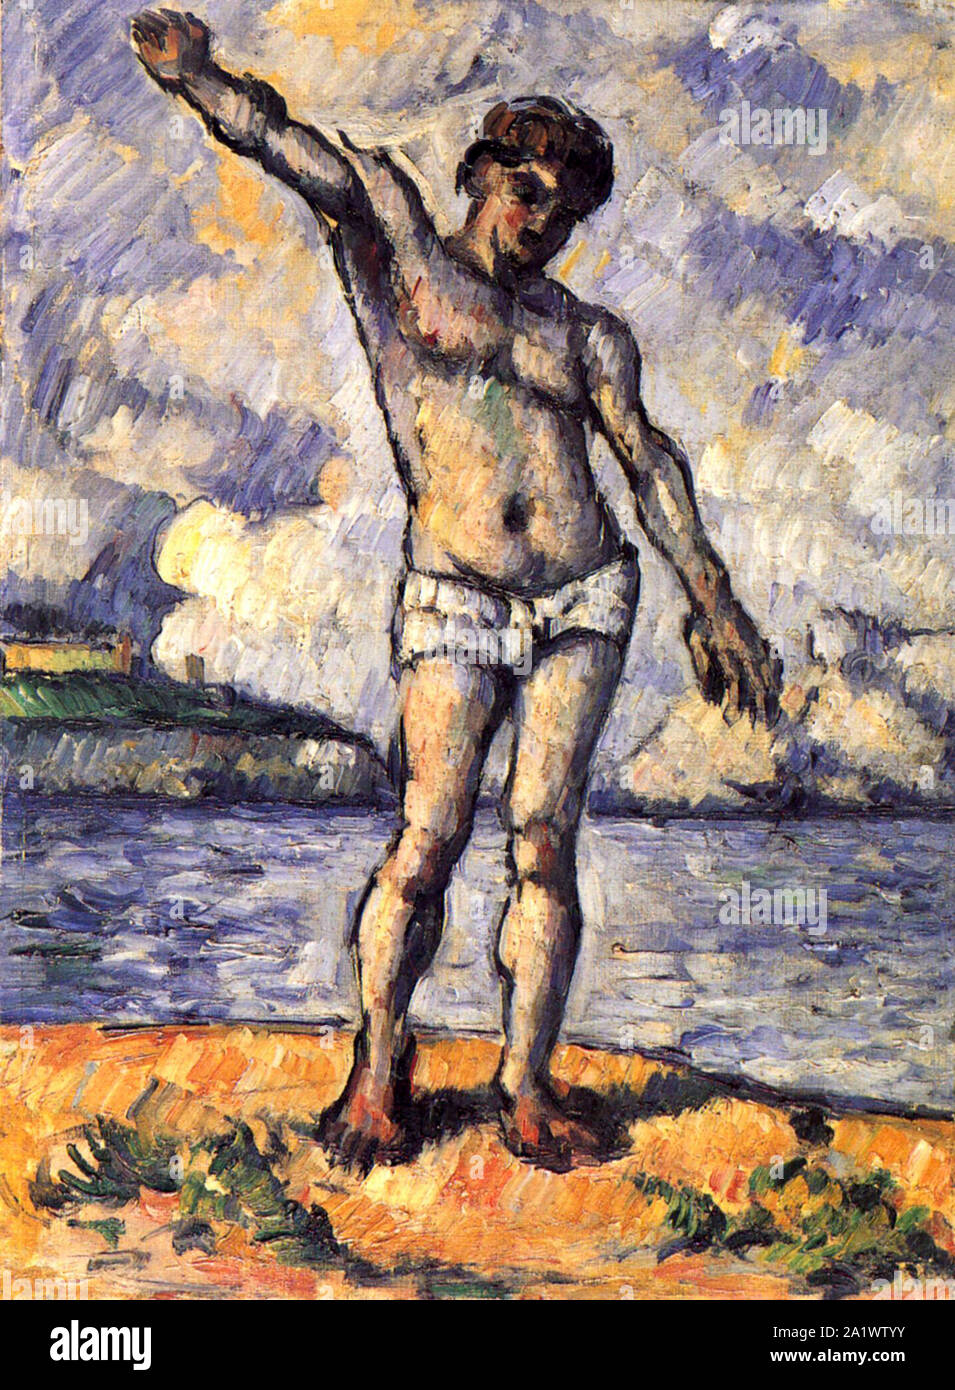 Man Standing, Arms Extended, by Paul Cézanne Stock Photo